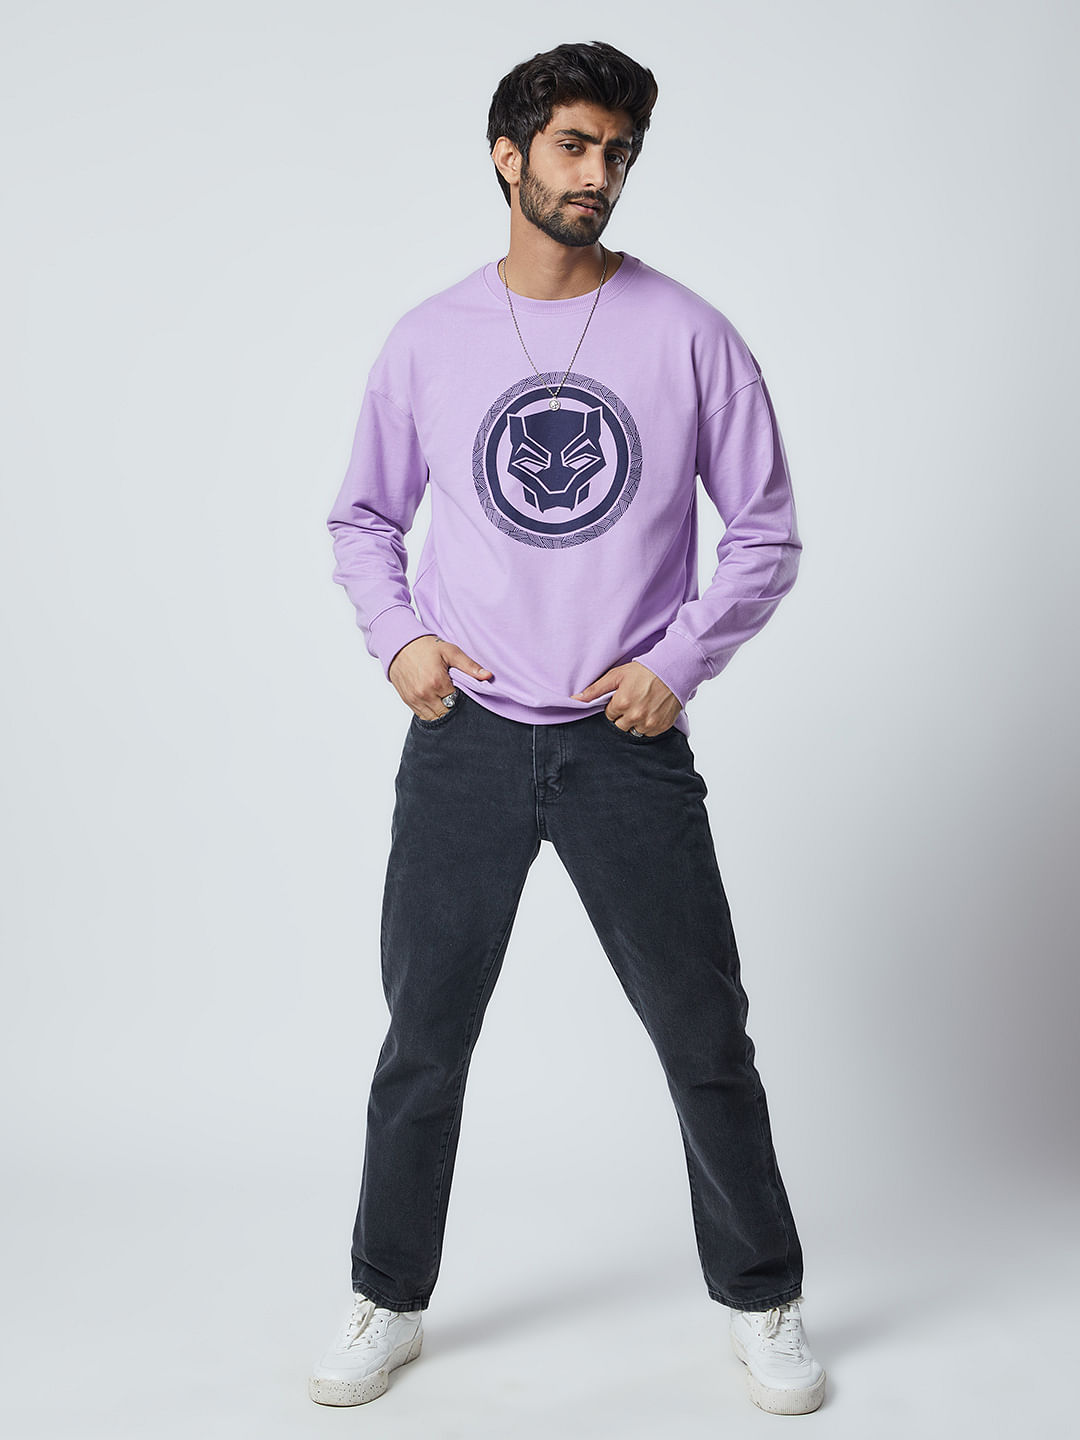 The Souled Store Hardik Pandya Collection - Buy The Souled Store Hardik  Pandya Collection online in India